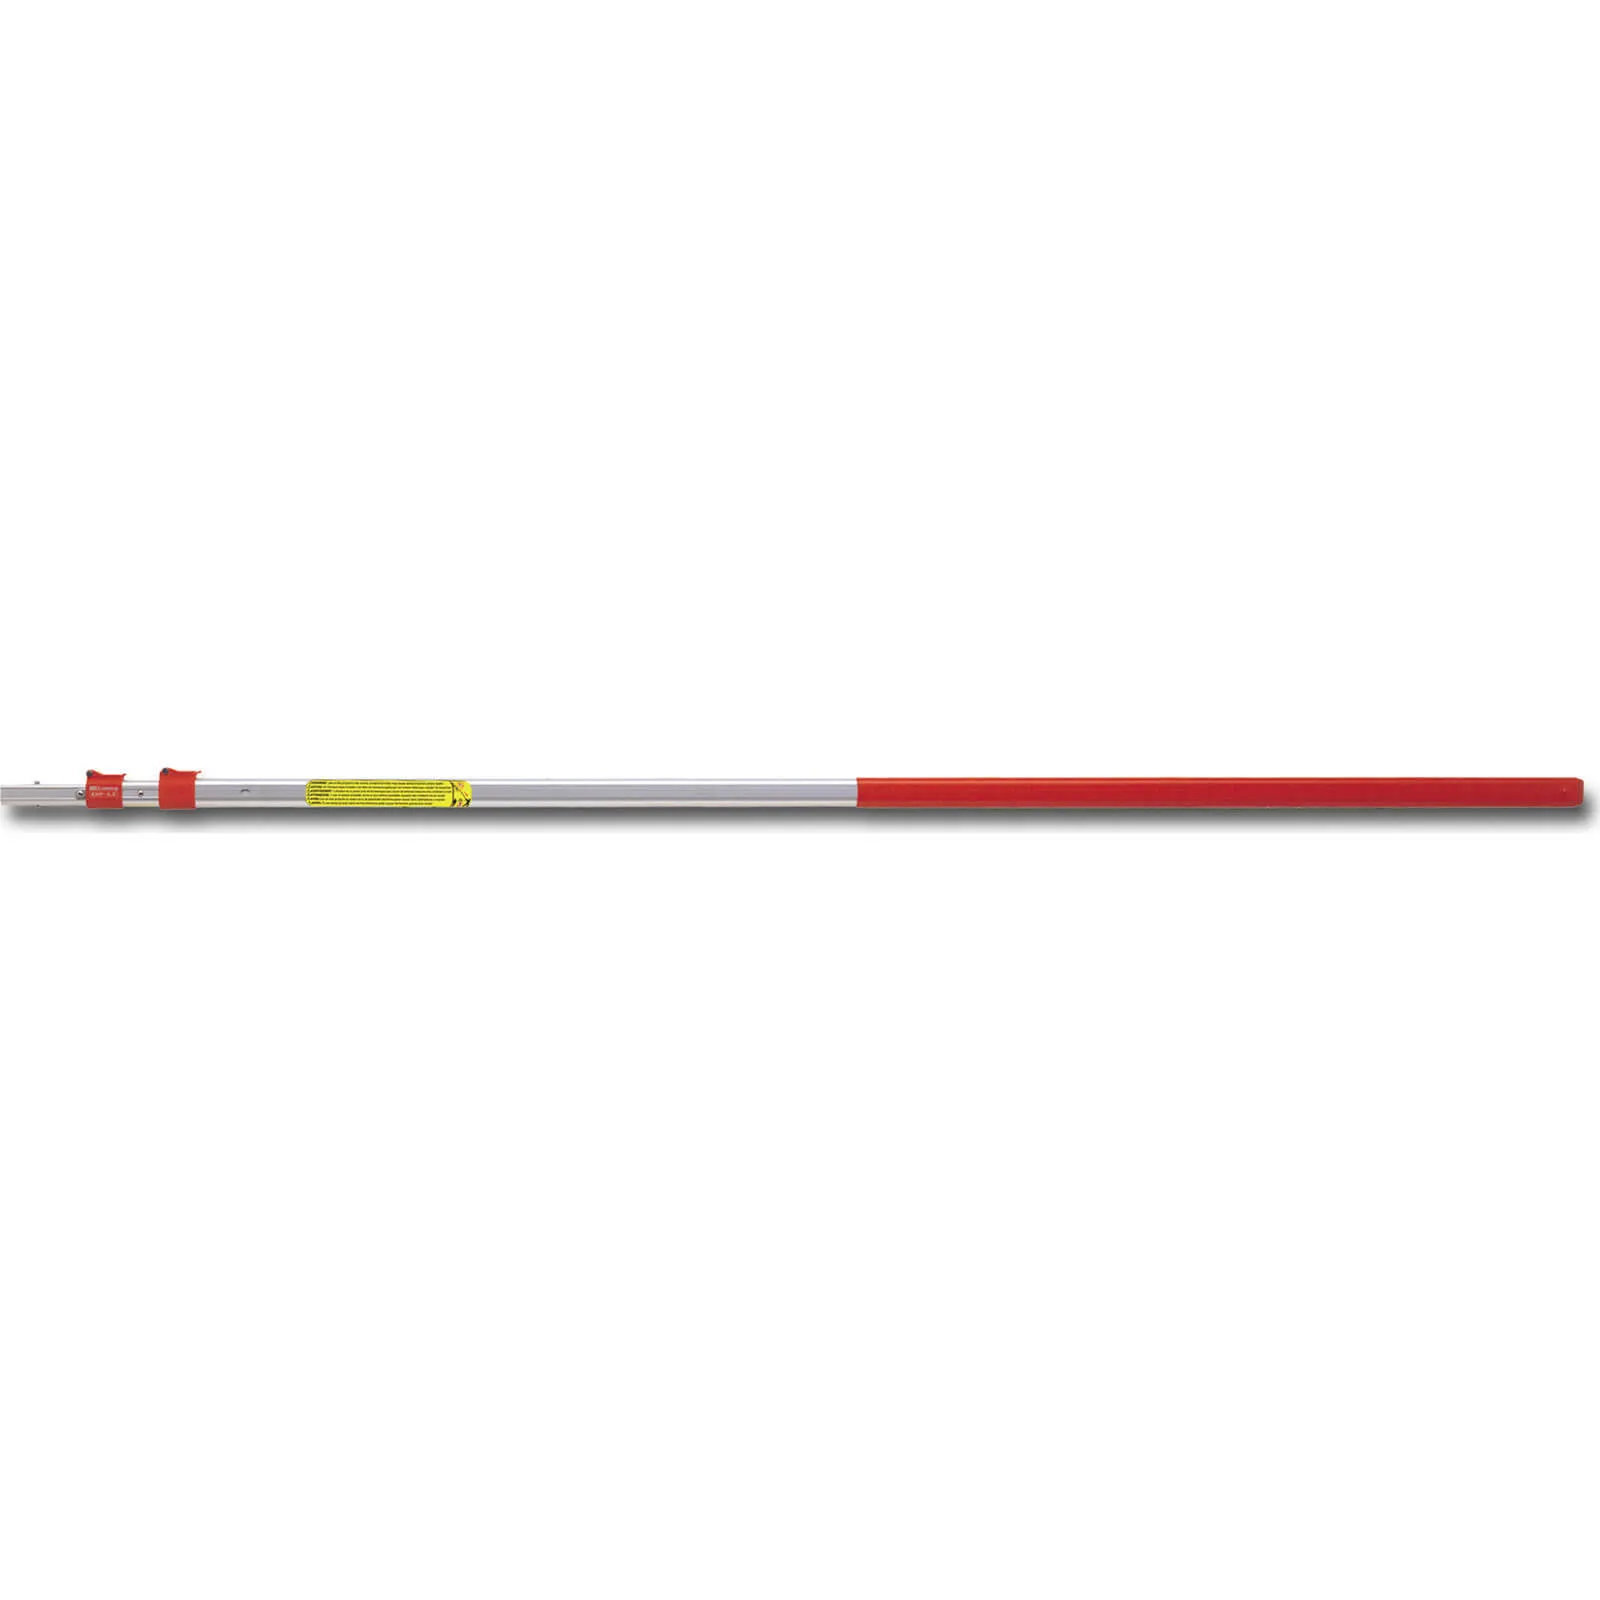 ARS EXP Telescopic Pole for Pole Saw Heads - 5.6m